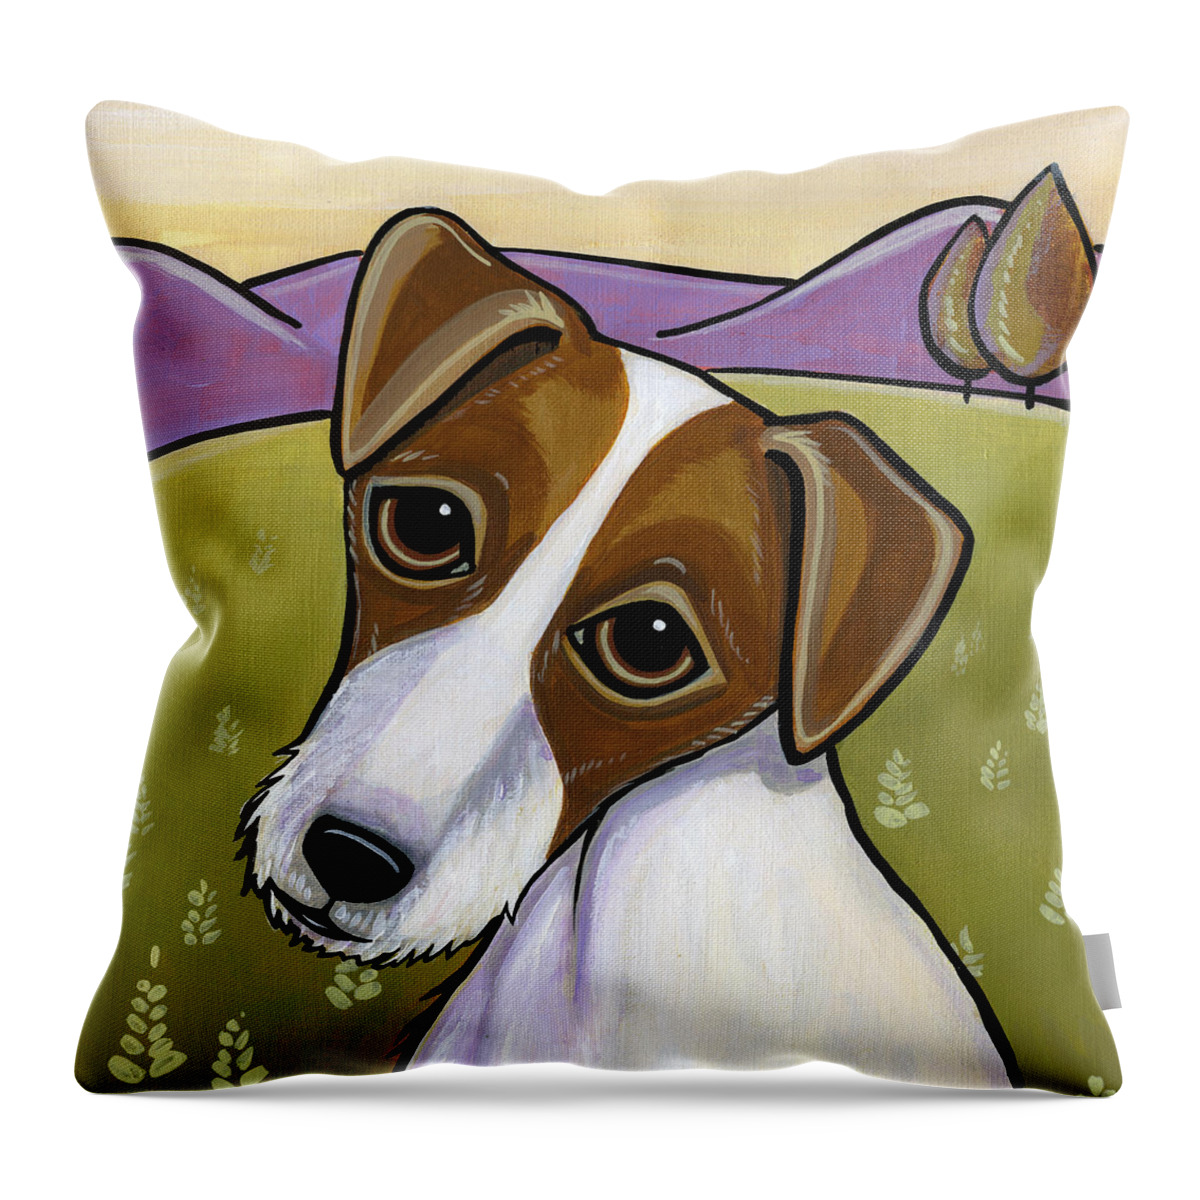 Jack Russell Throw Pillow featuring the painting Jack Russell by Leanne Wilkes